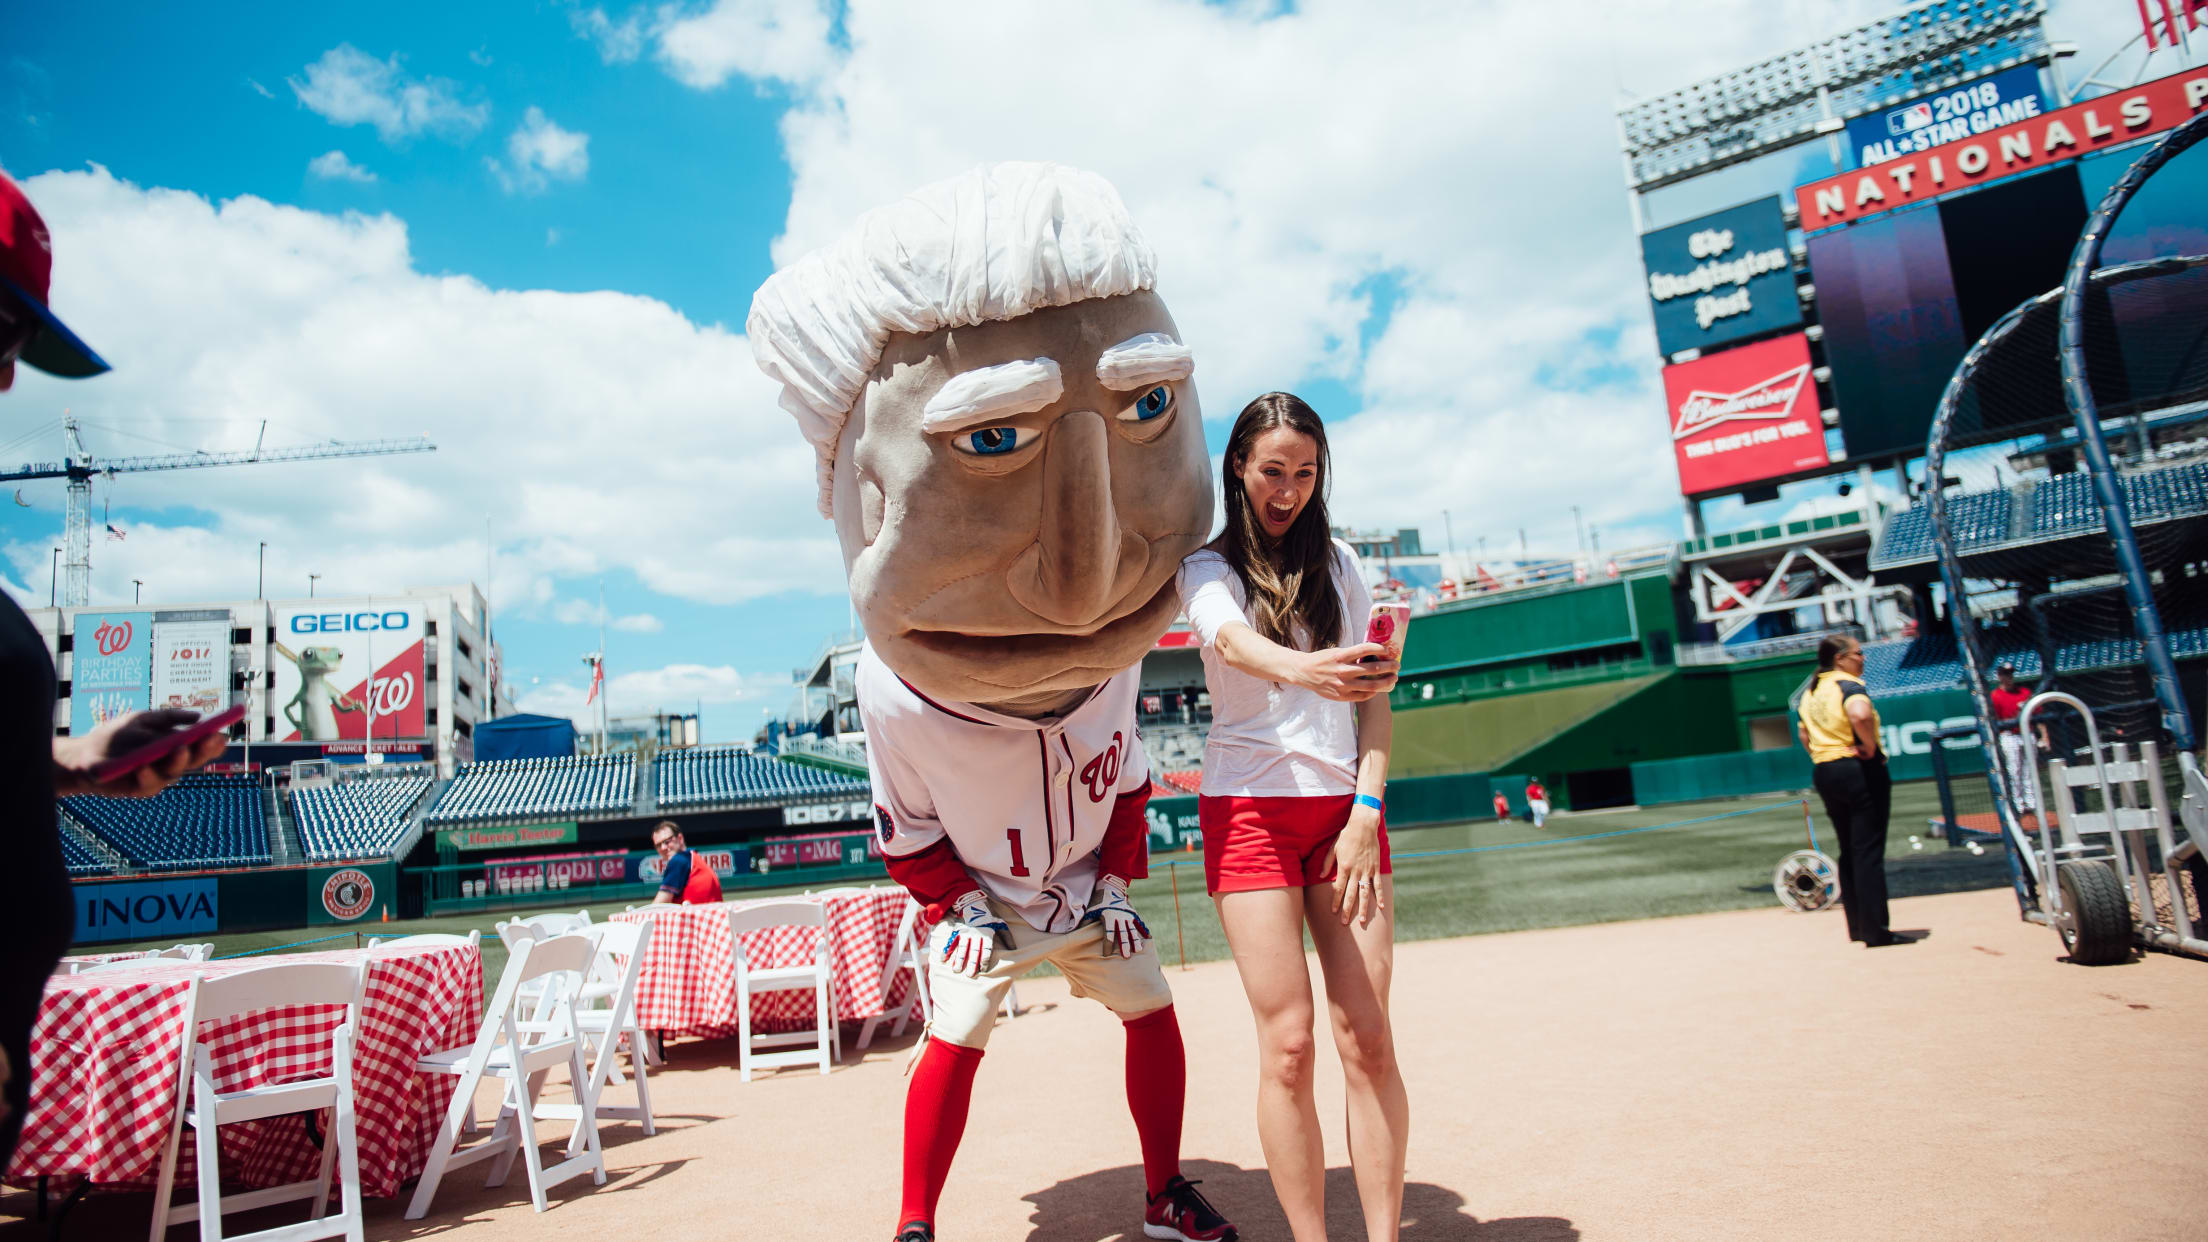 Mascot for Washington Nationals: What is it?